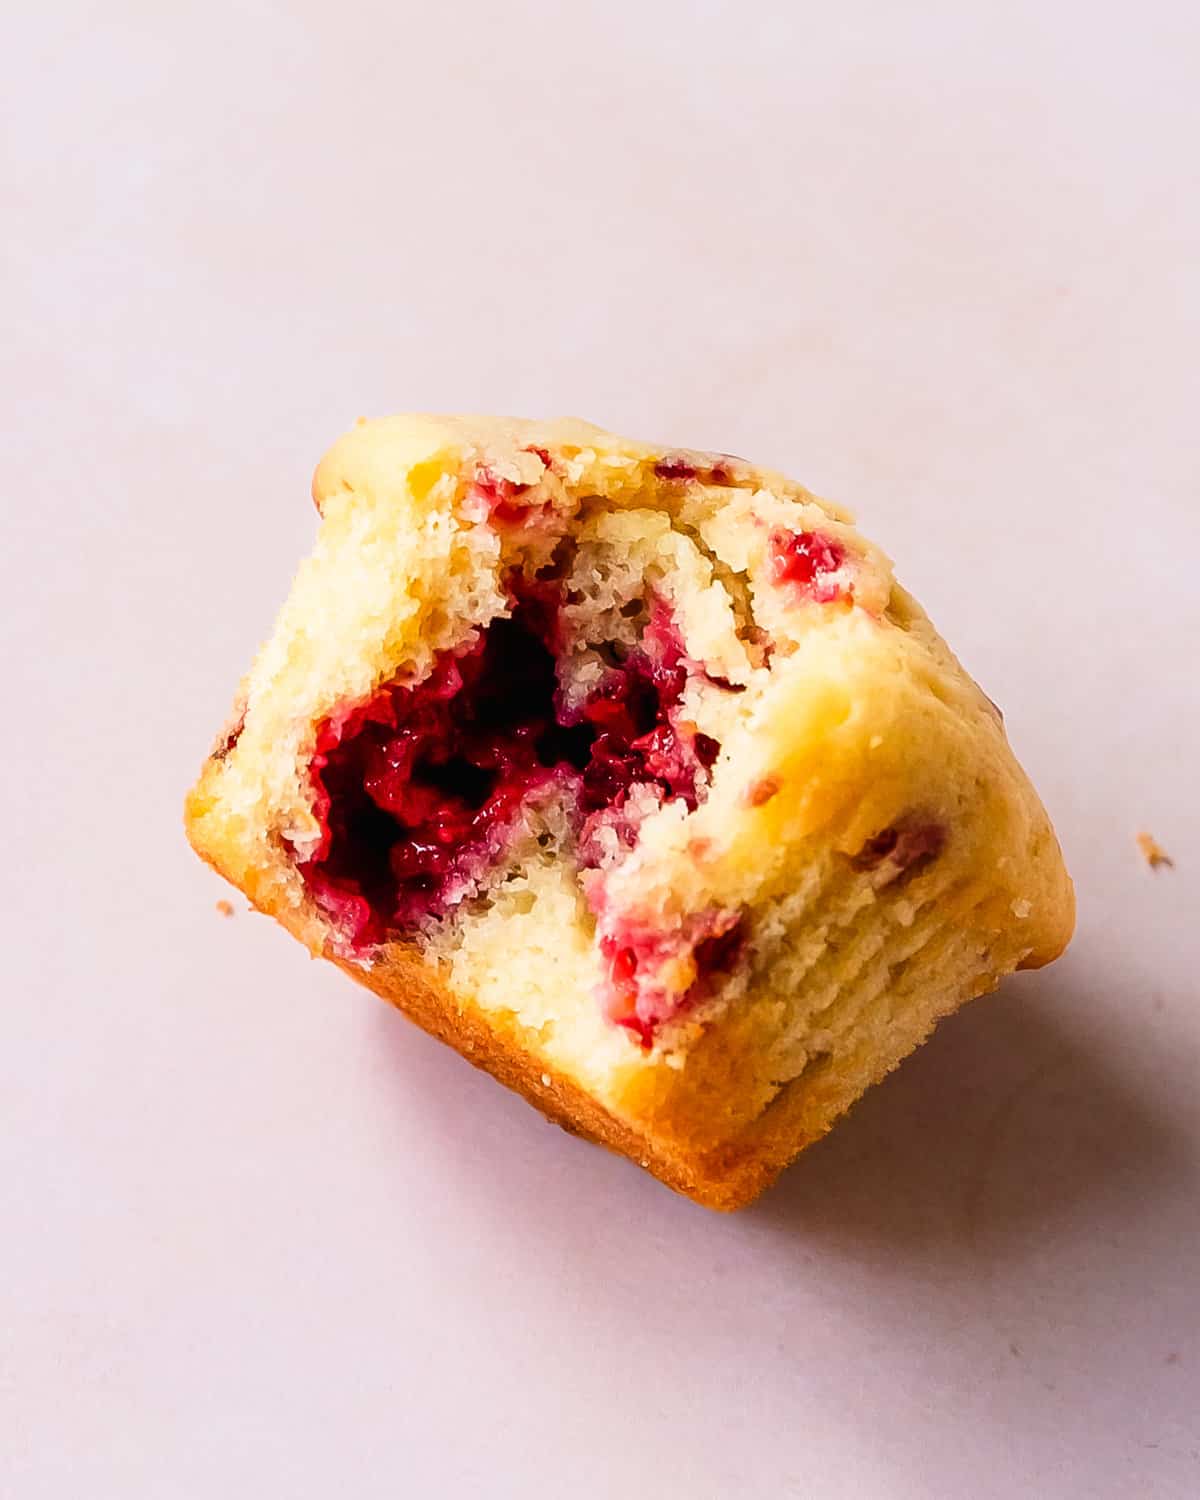 These raspberry muffins are light, fluffy and incredibly moist bakery style muffins filled with fresh or frozen raspberries and a hint of lemon.